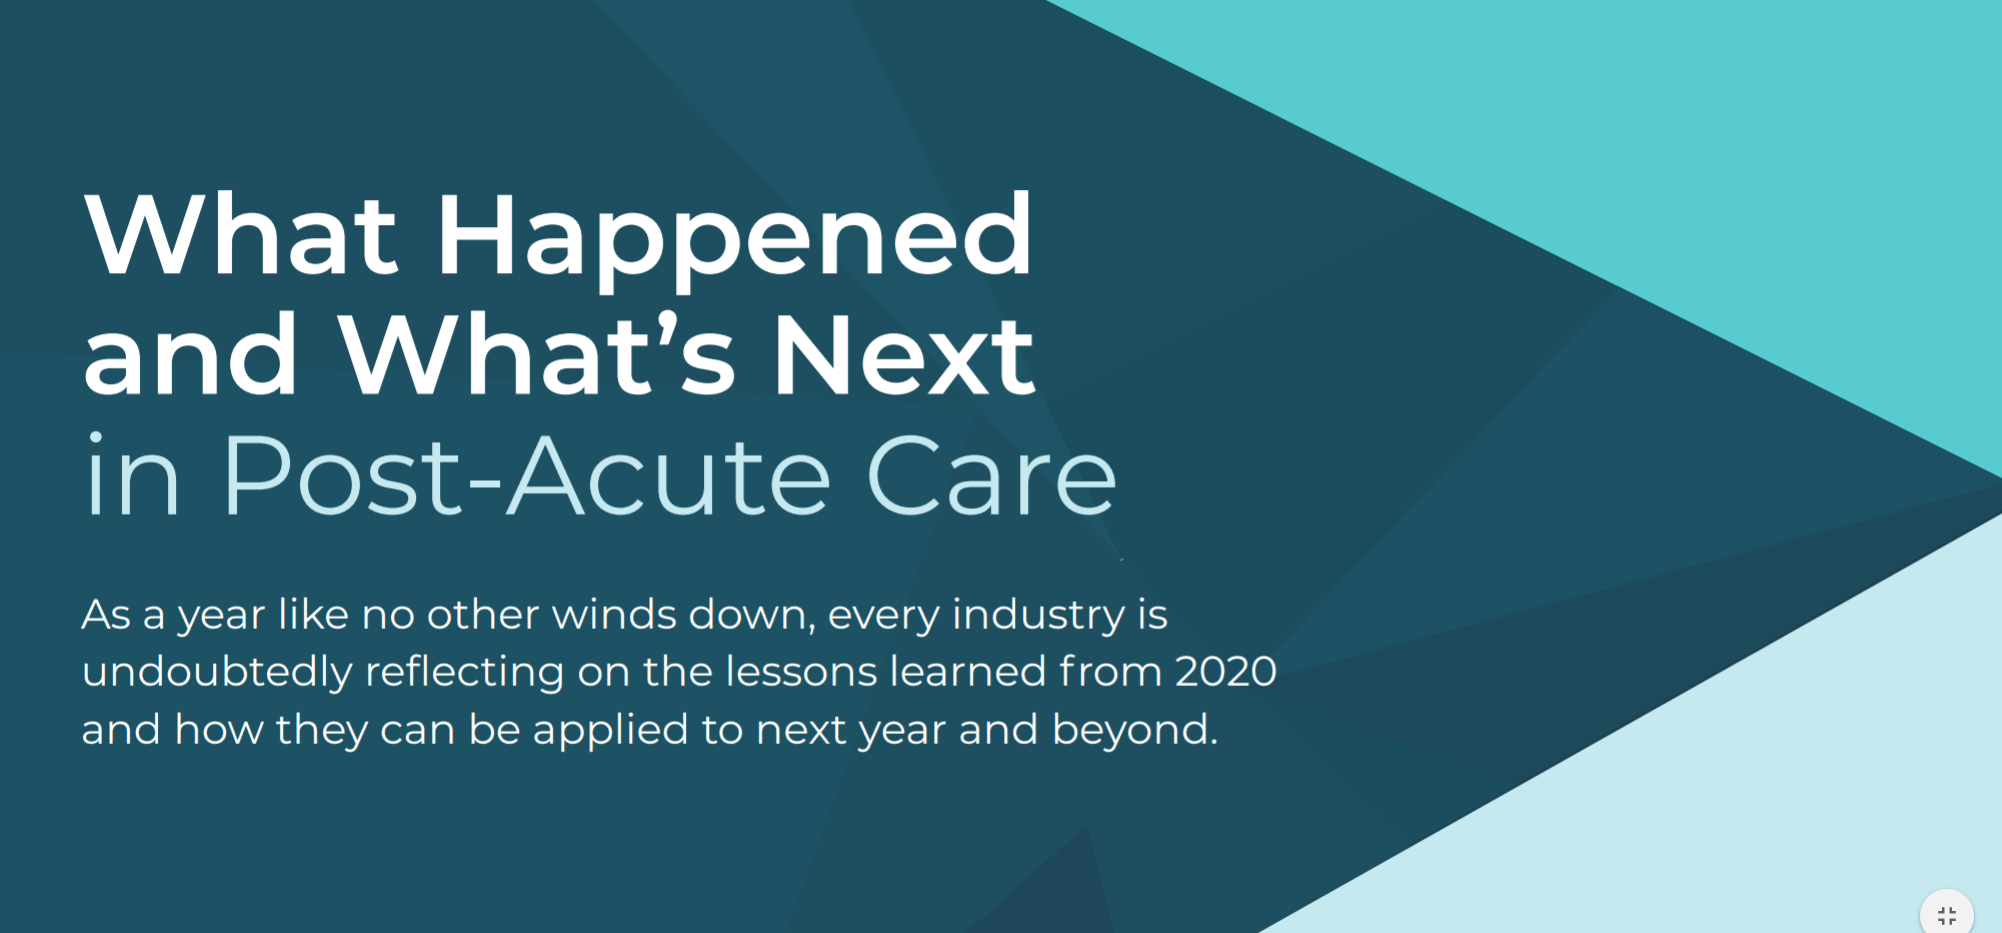 5 Post-Acute Care Industry Trends to Watch in 2021